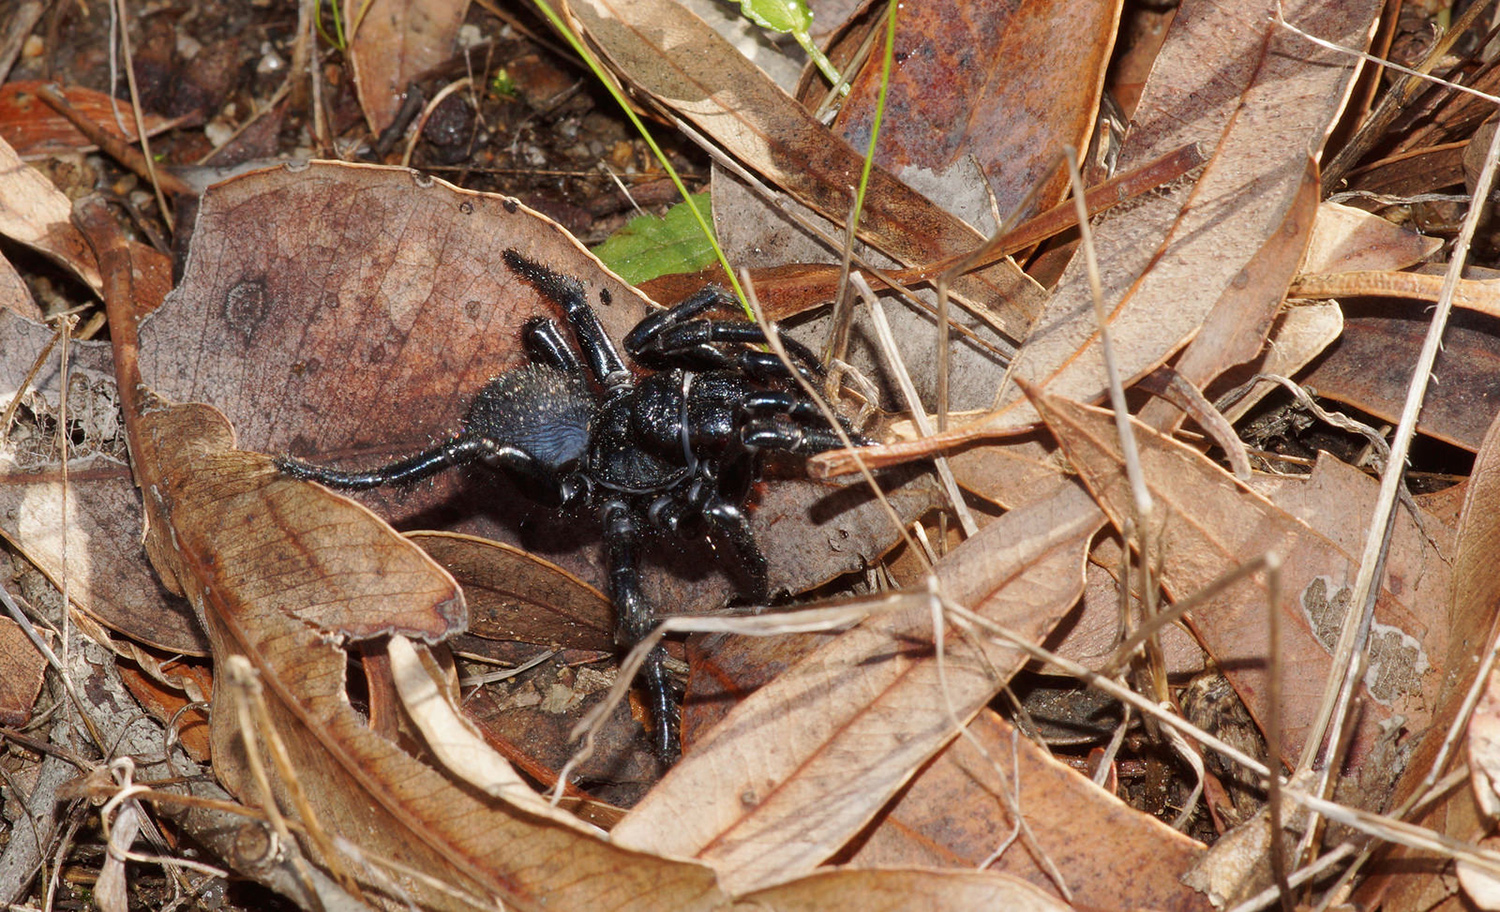 Female mouse spider. Photo credit: ron_n_beths pics via Foter.com / CC BY-NC